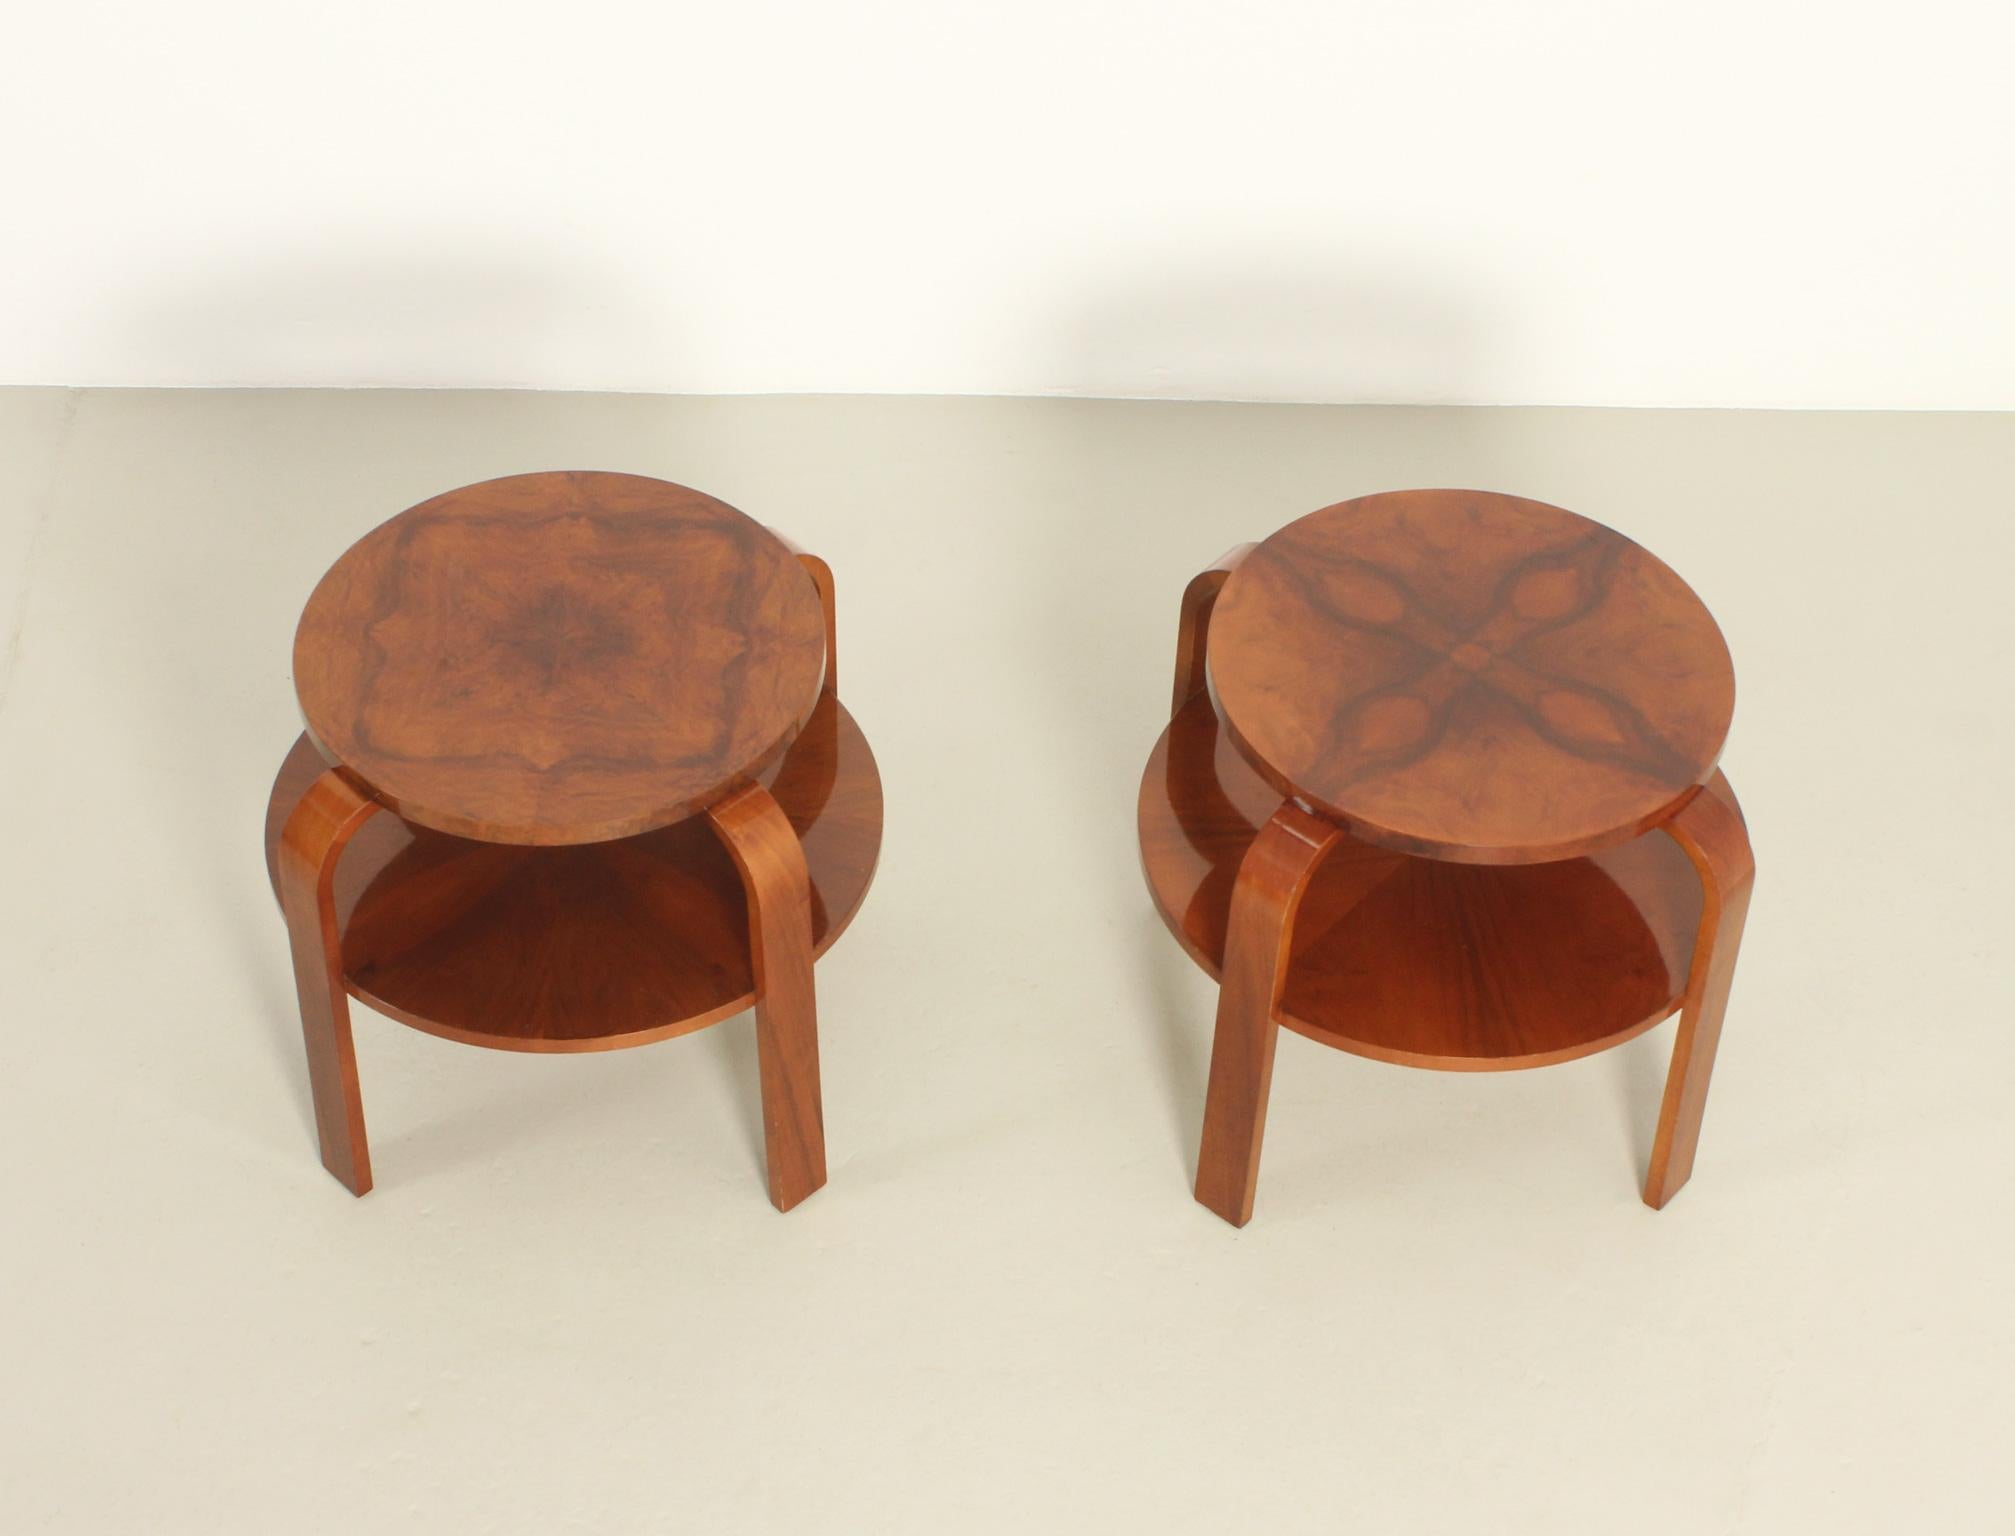 Spanish Pair of Art Deco Side Tables from 1930s, Spain